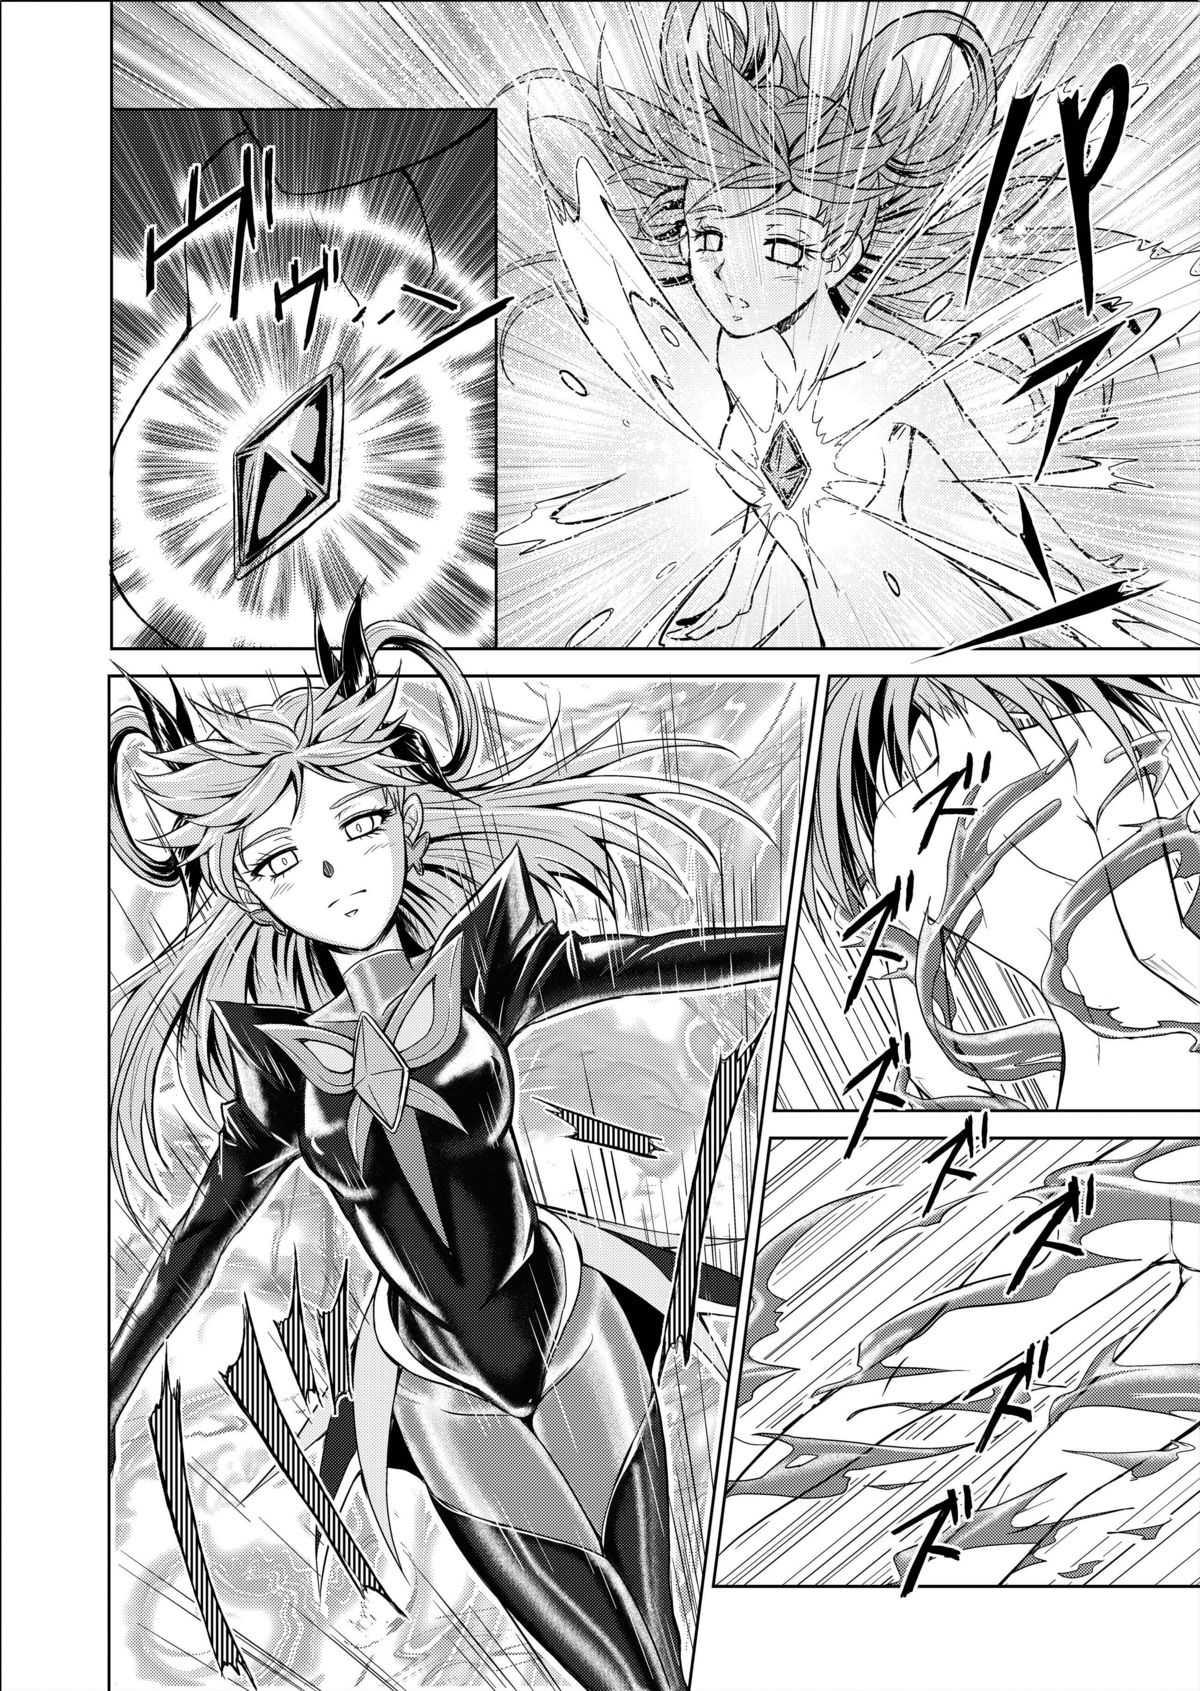 [Macxes] Another Conclusion 3 (Pretty Cure) [English][SaHa] 